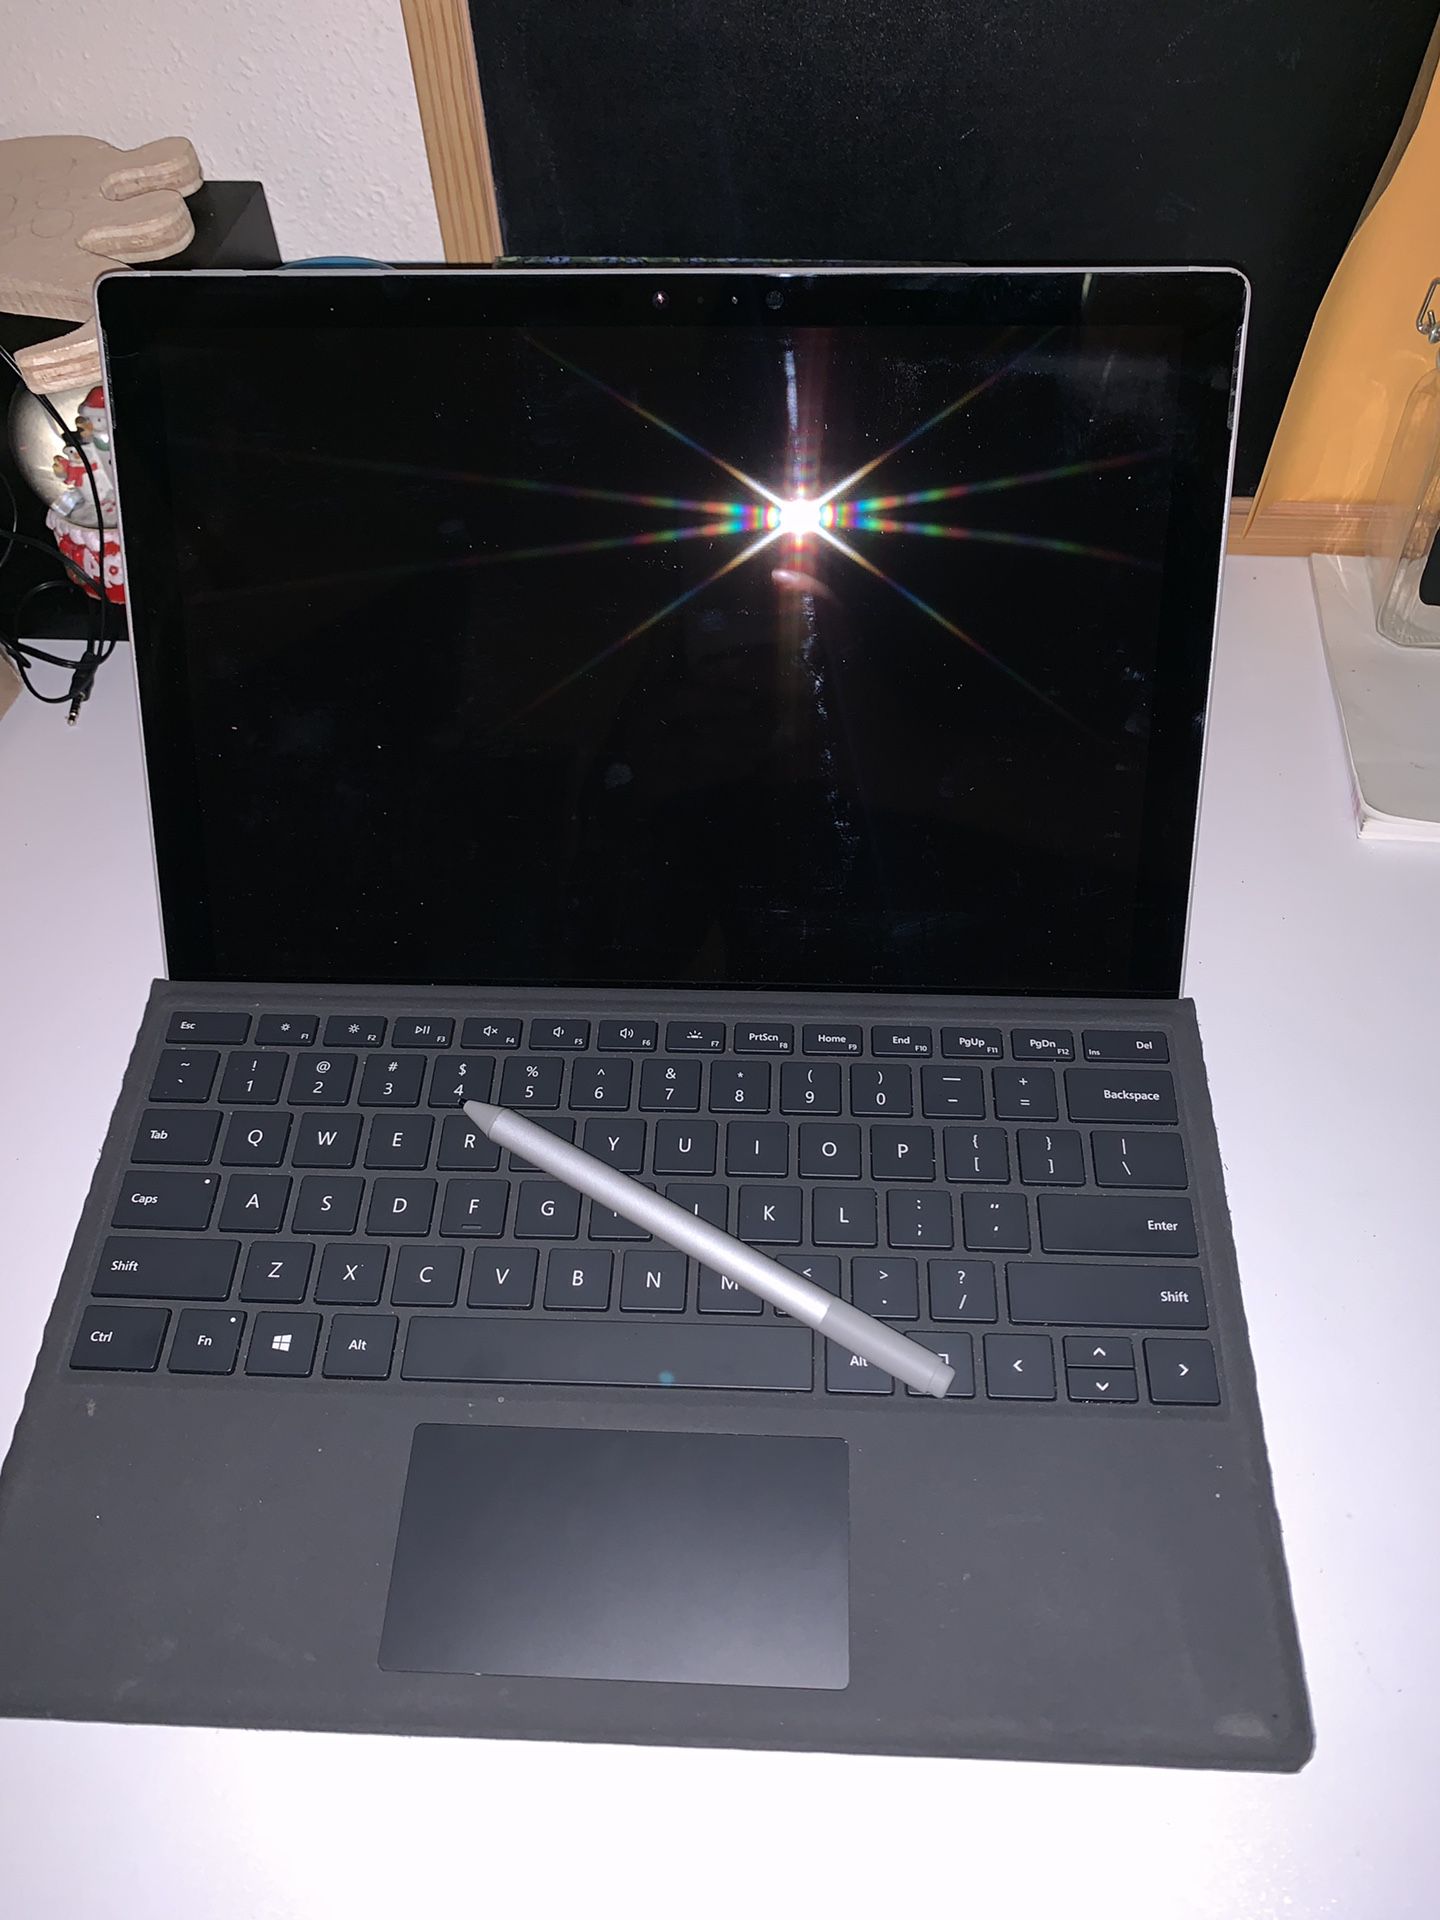 Microsoft Surface Pro with pen & keyboard